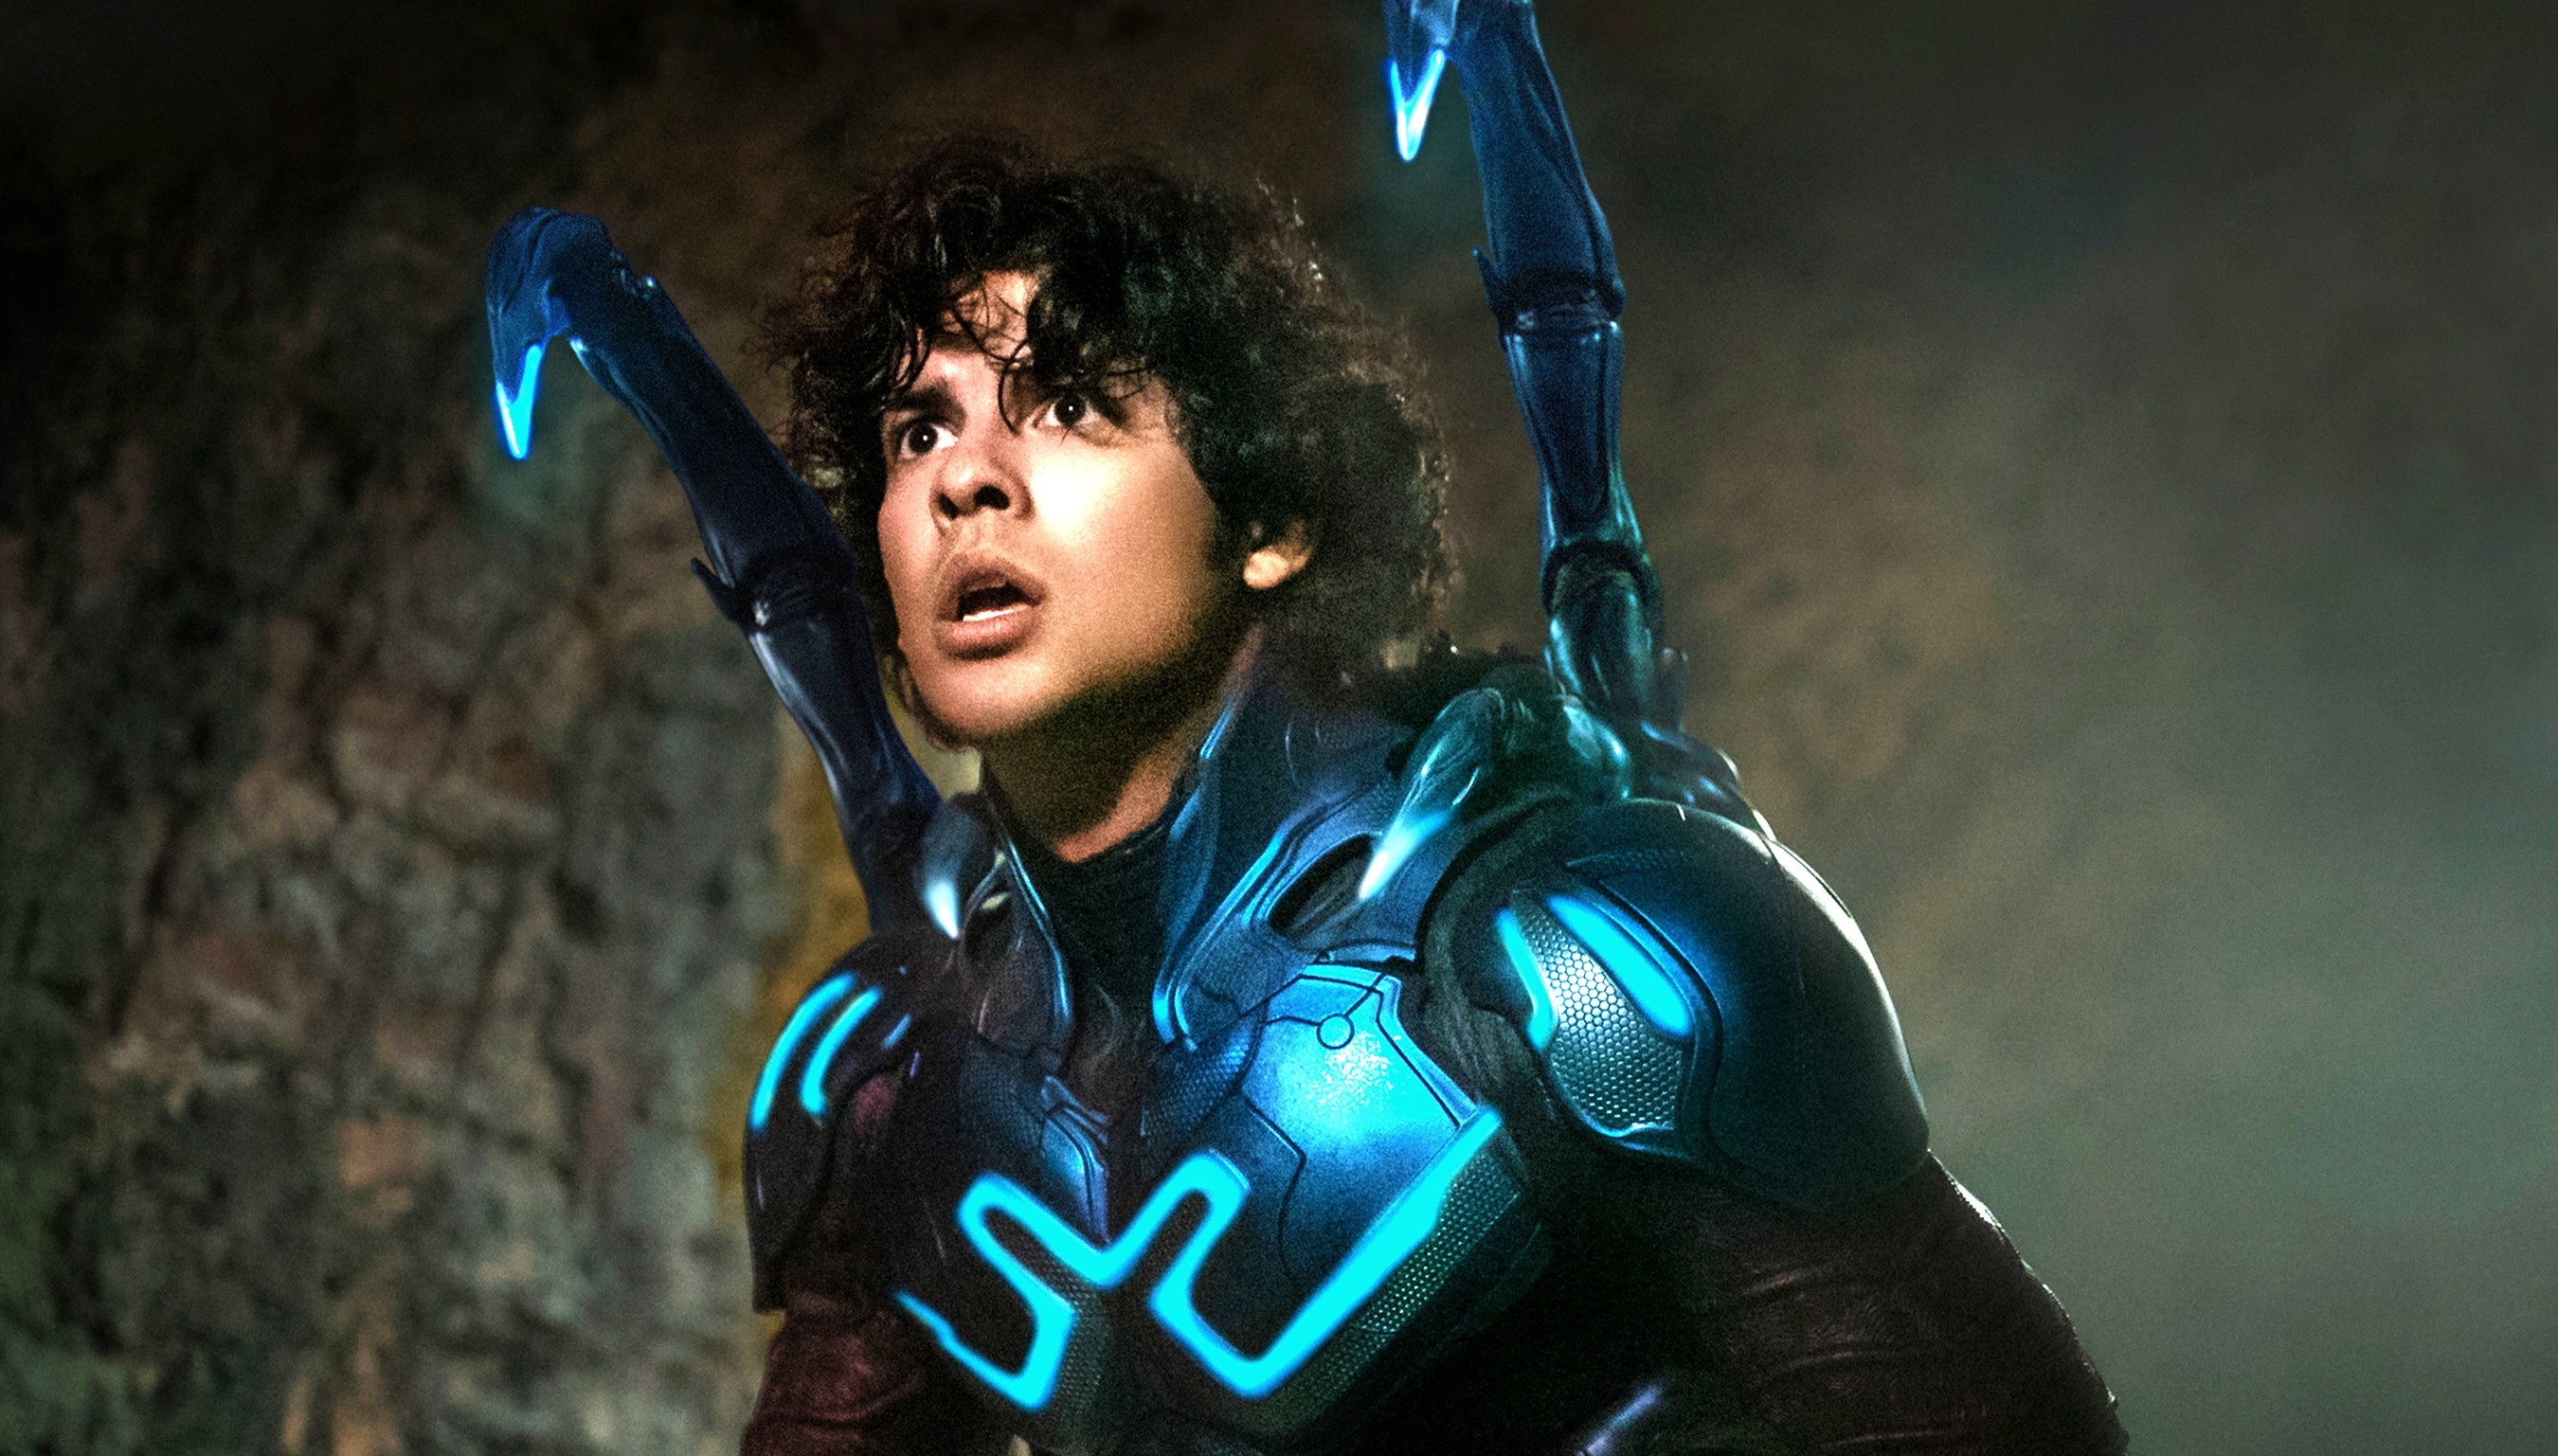 Blue Beetle is getting an ongoing DC comic book to debut alongside Jaime  Reyes' new movie